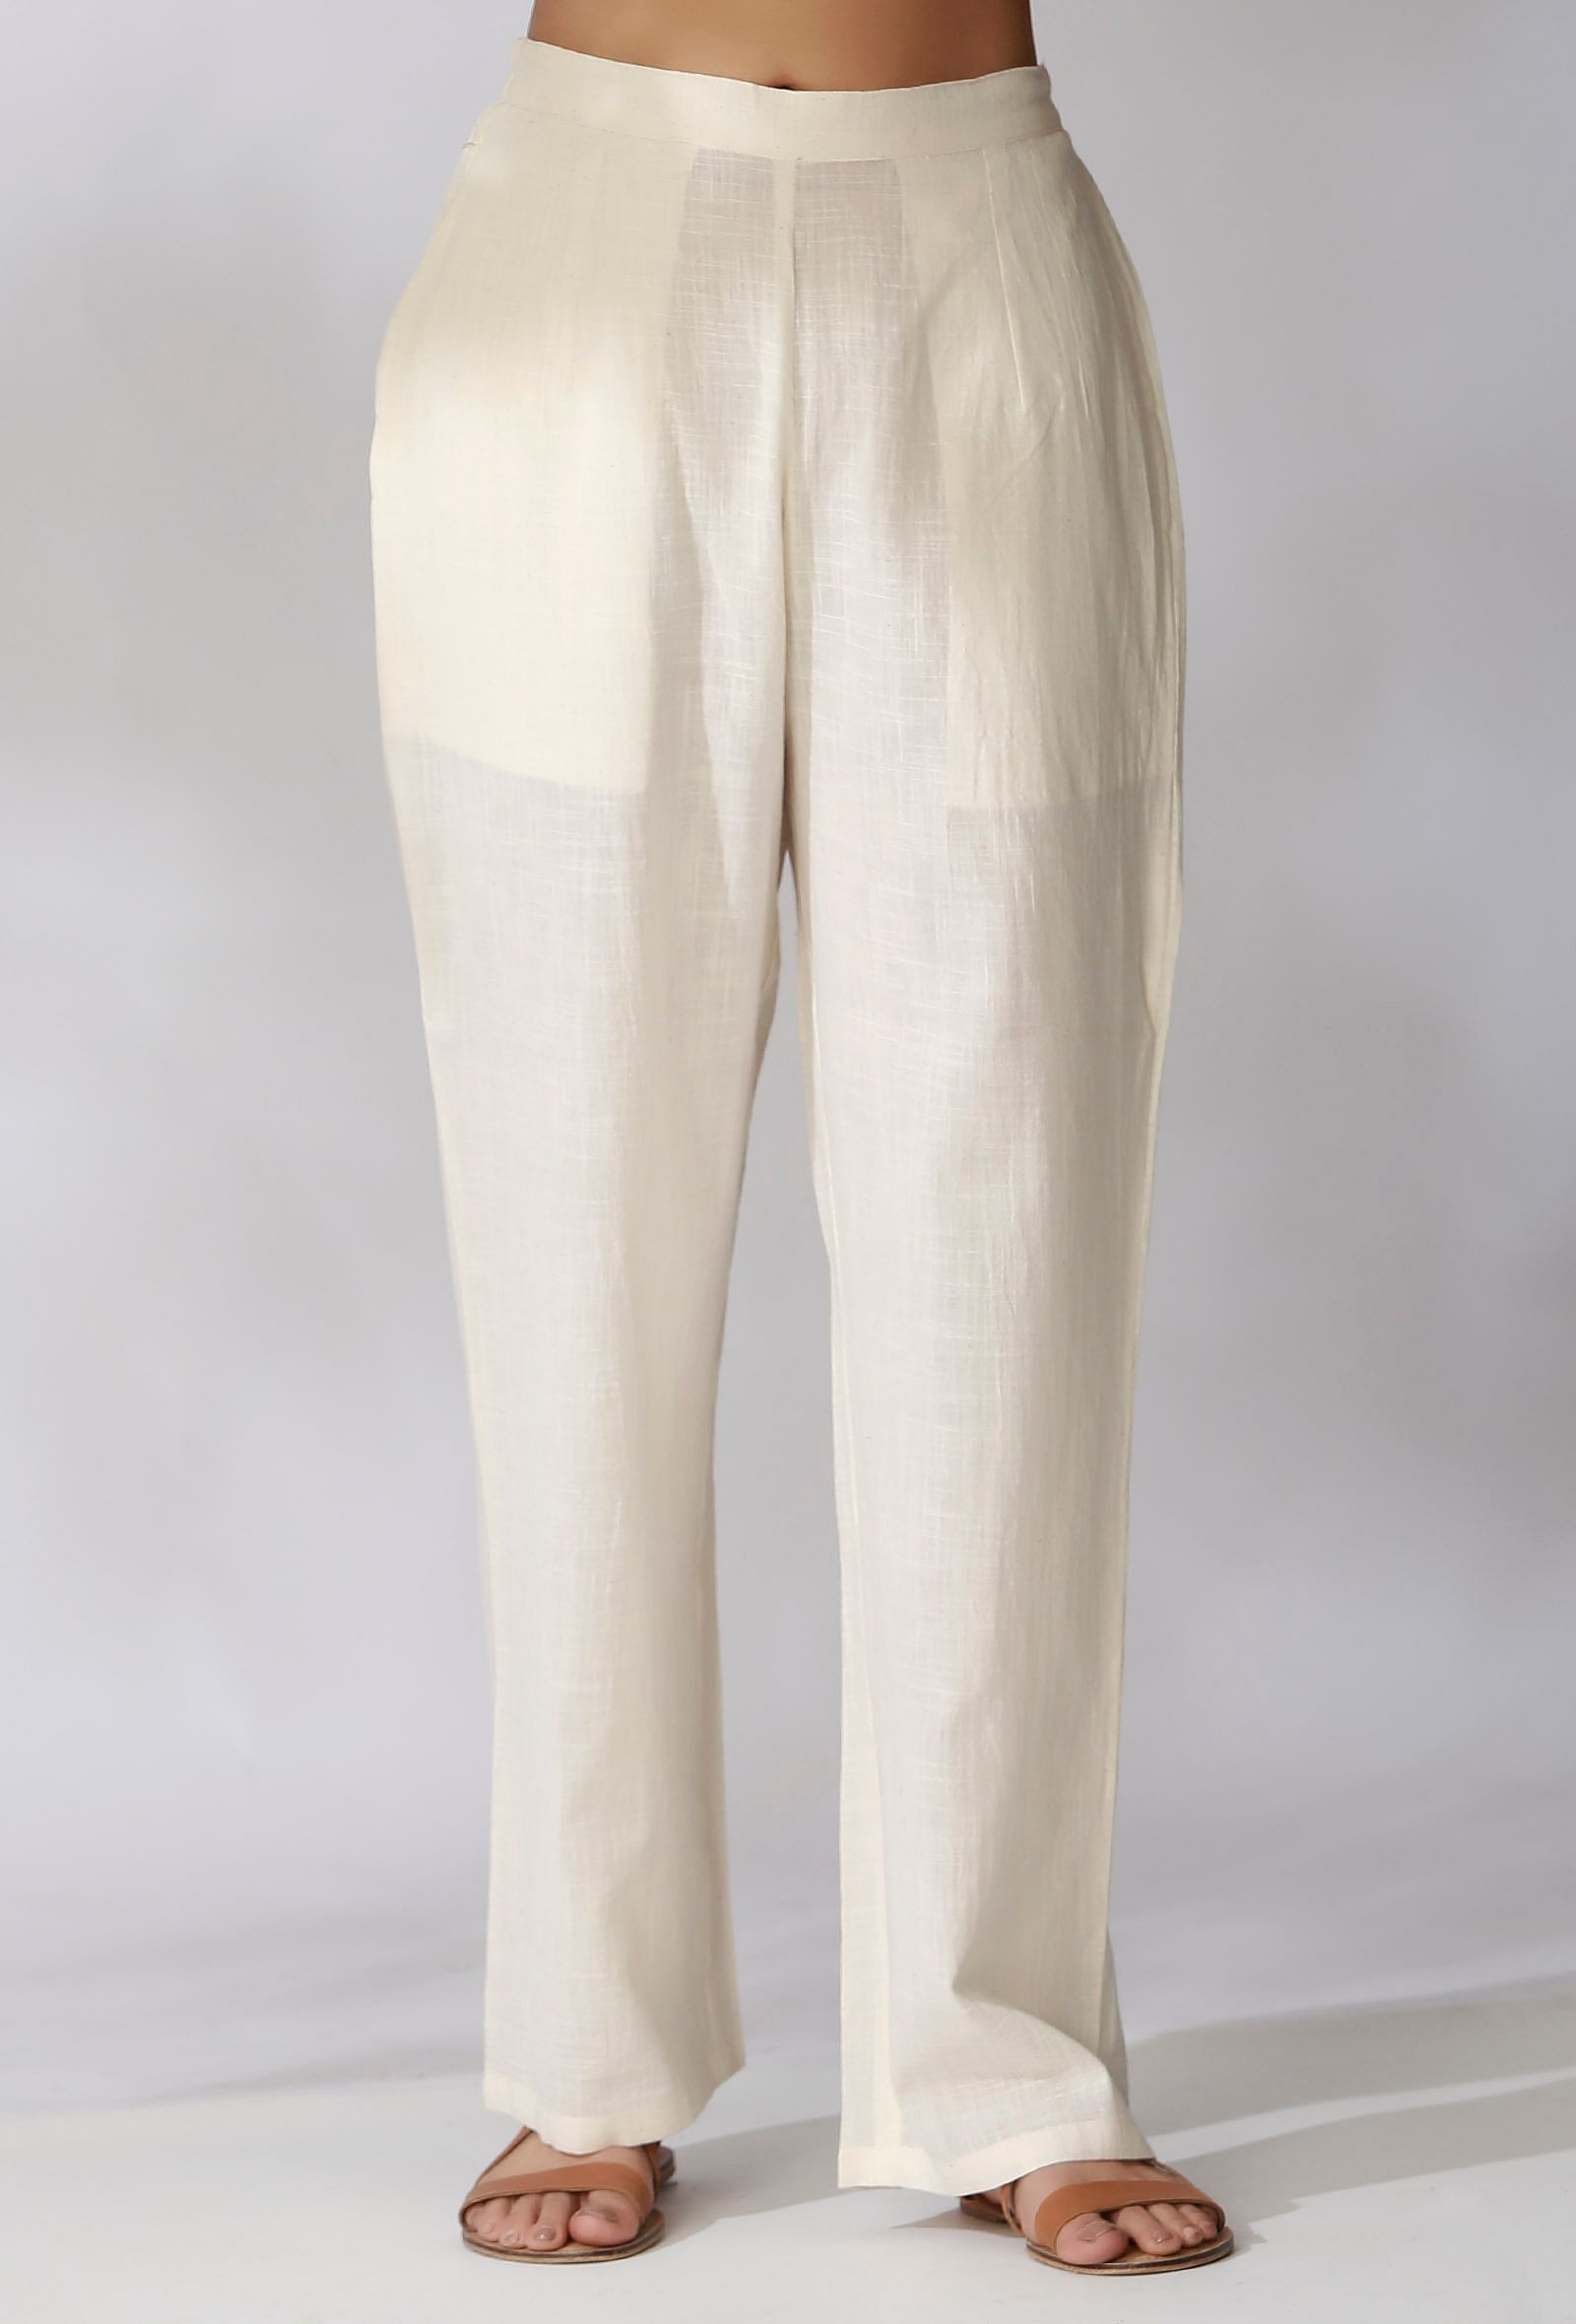 Womens Wide Leg Pants  Abercrombie  Fitch